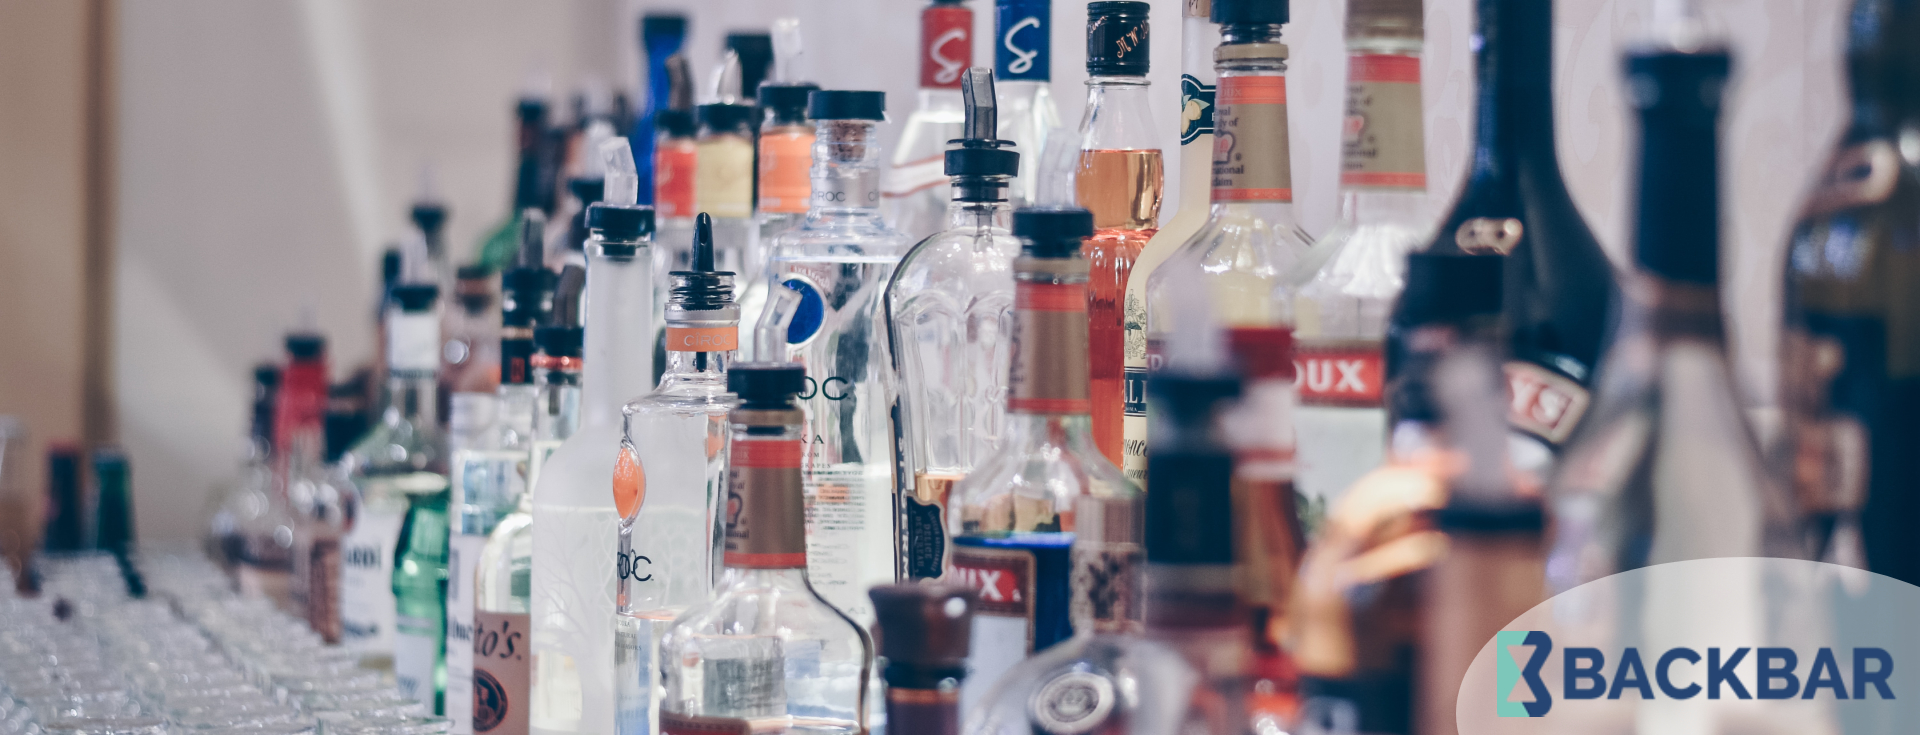 How to Measure and Improve Your Bar Inventory Performance